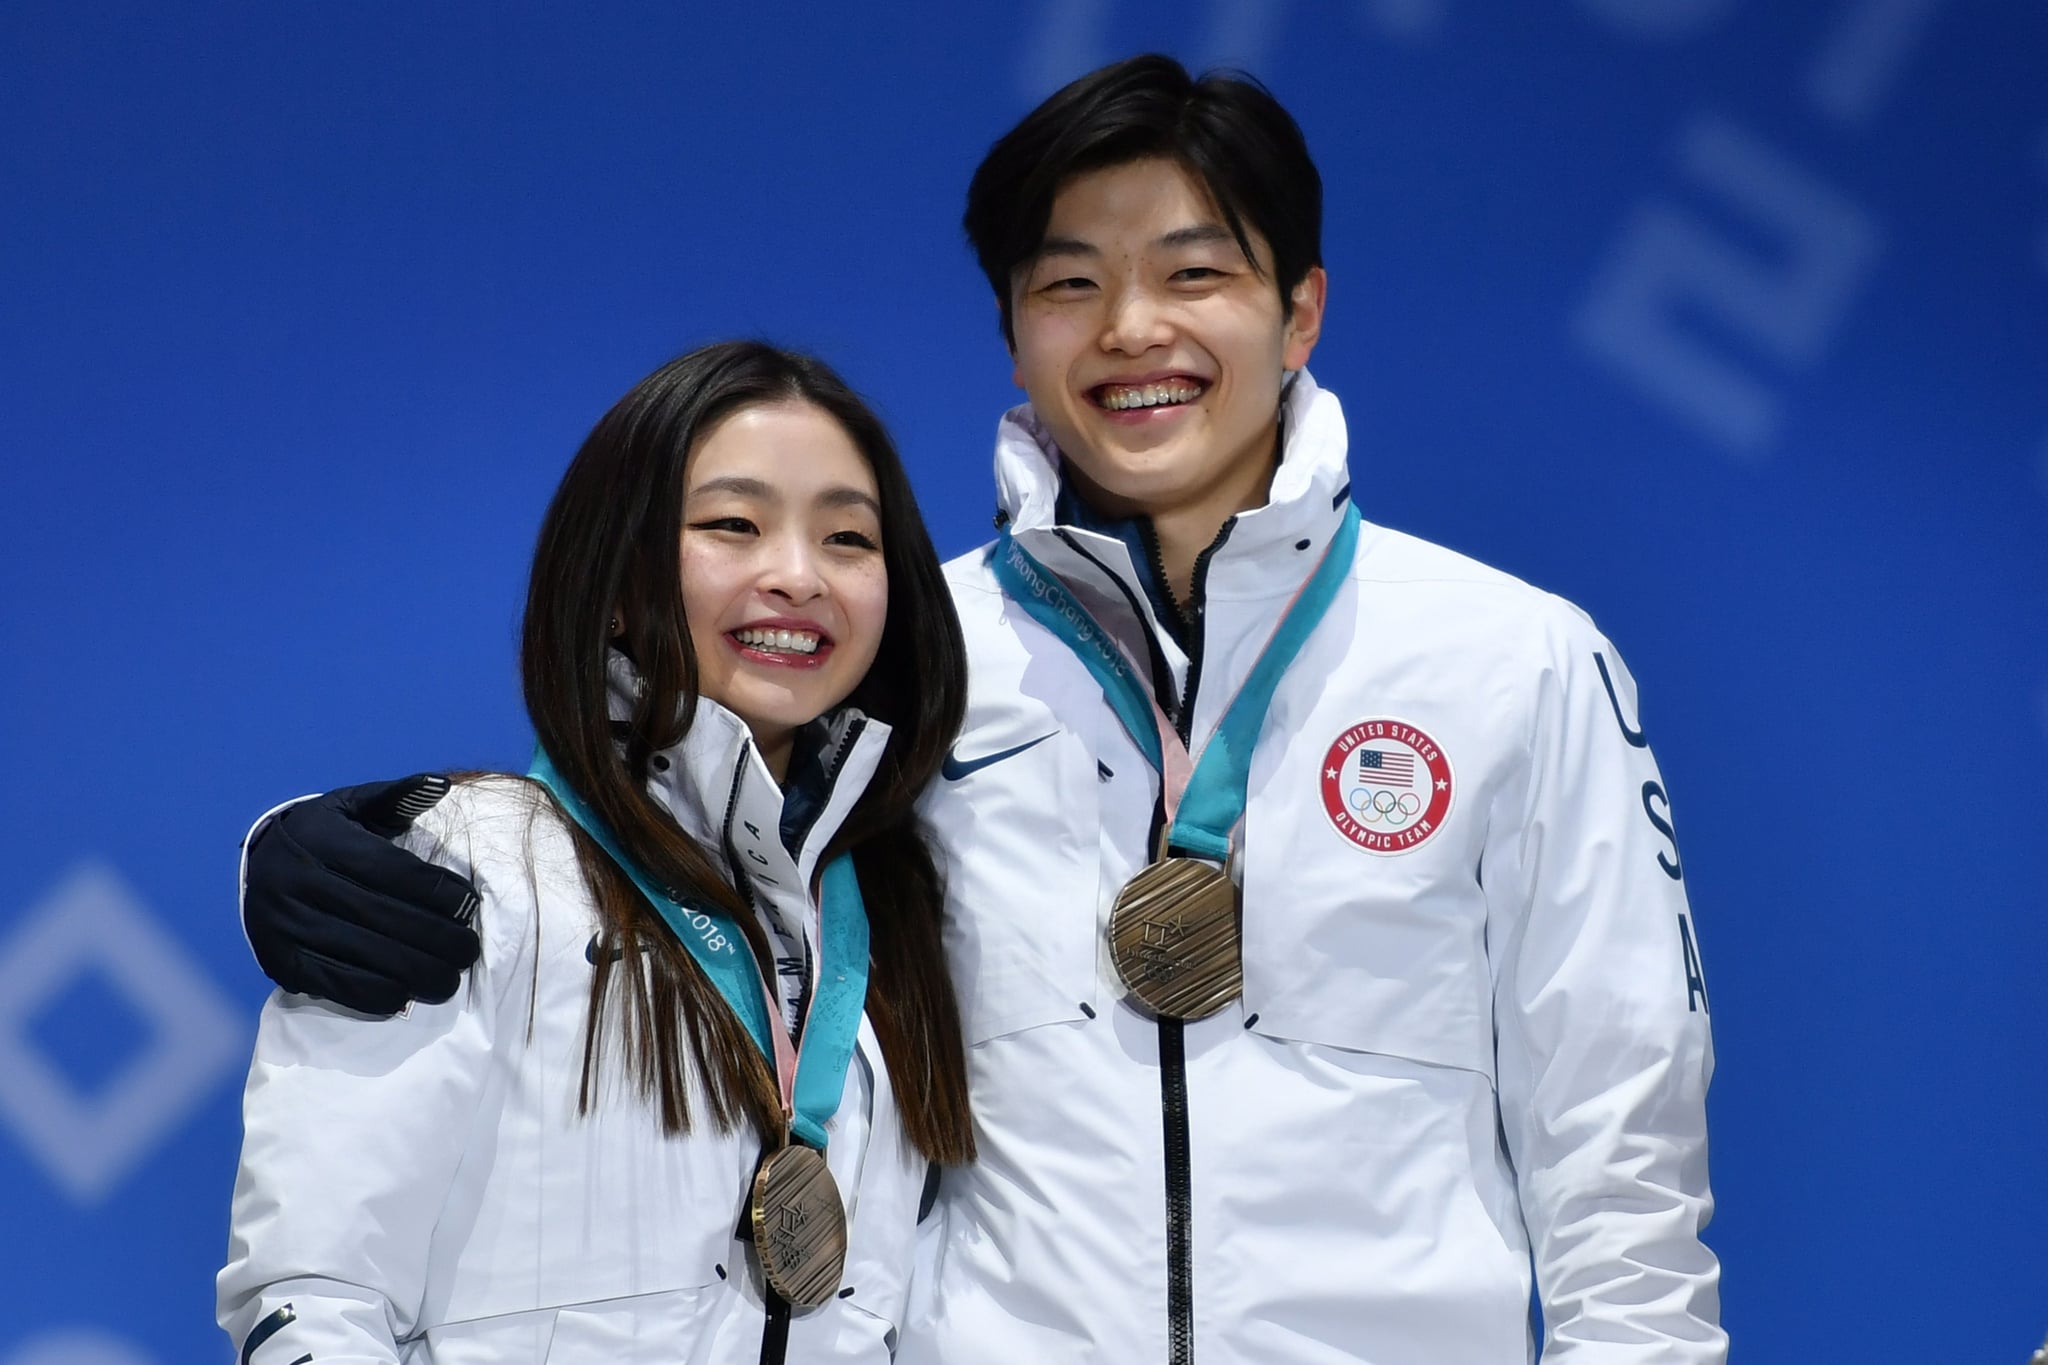 USA's bronze medallists Maia Shibutani and Alex Shibutani on the podium during the medal ceremony for the figure skating ice dance at Pyeongchang 2018 Winter Olympic Games.